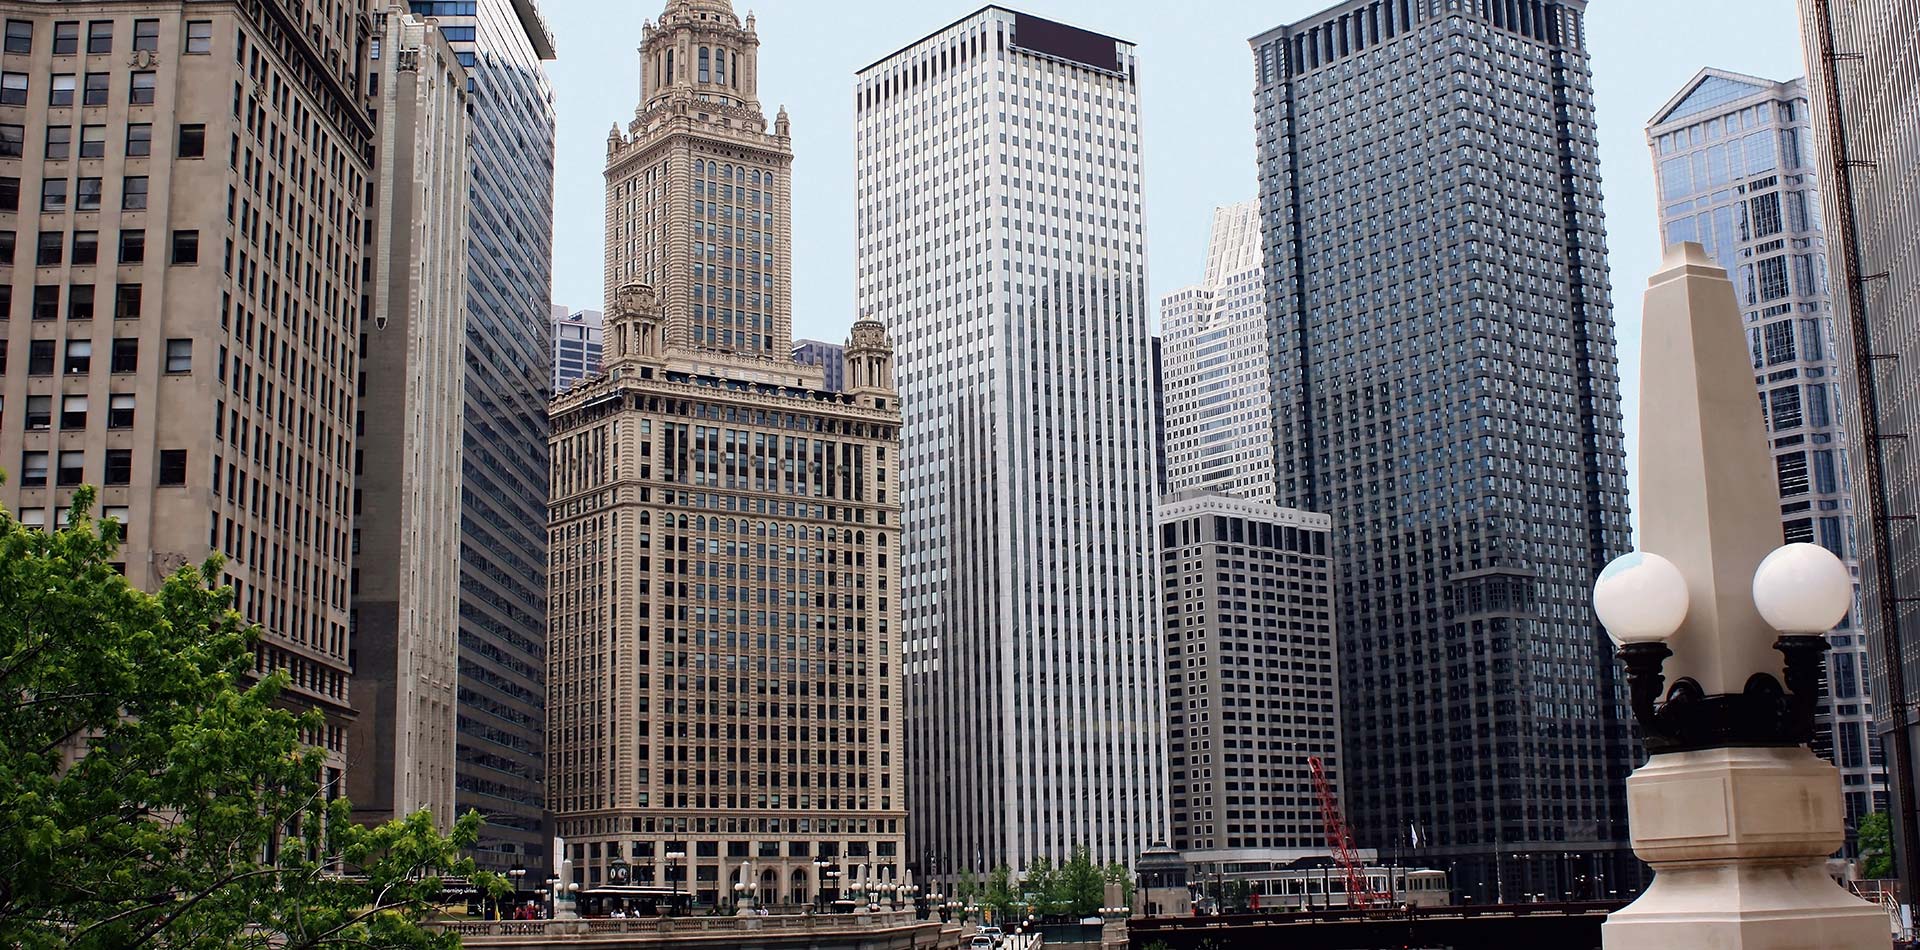 A group of tall buildings in a city under ELEET's commercial pest control